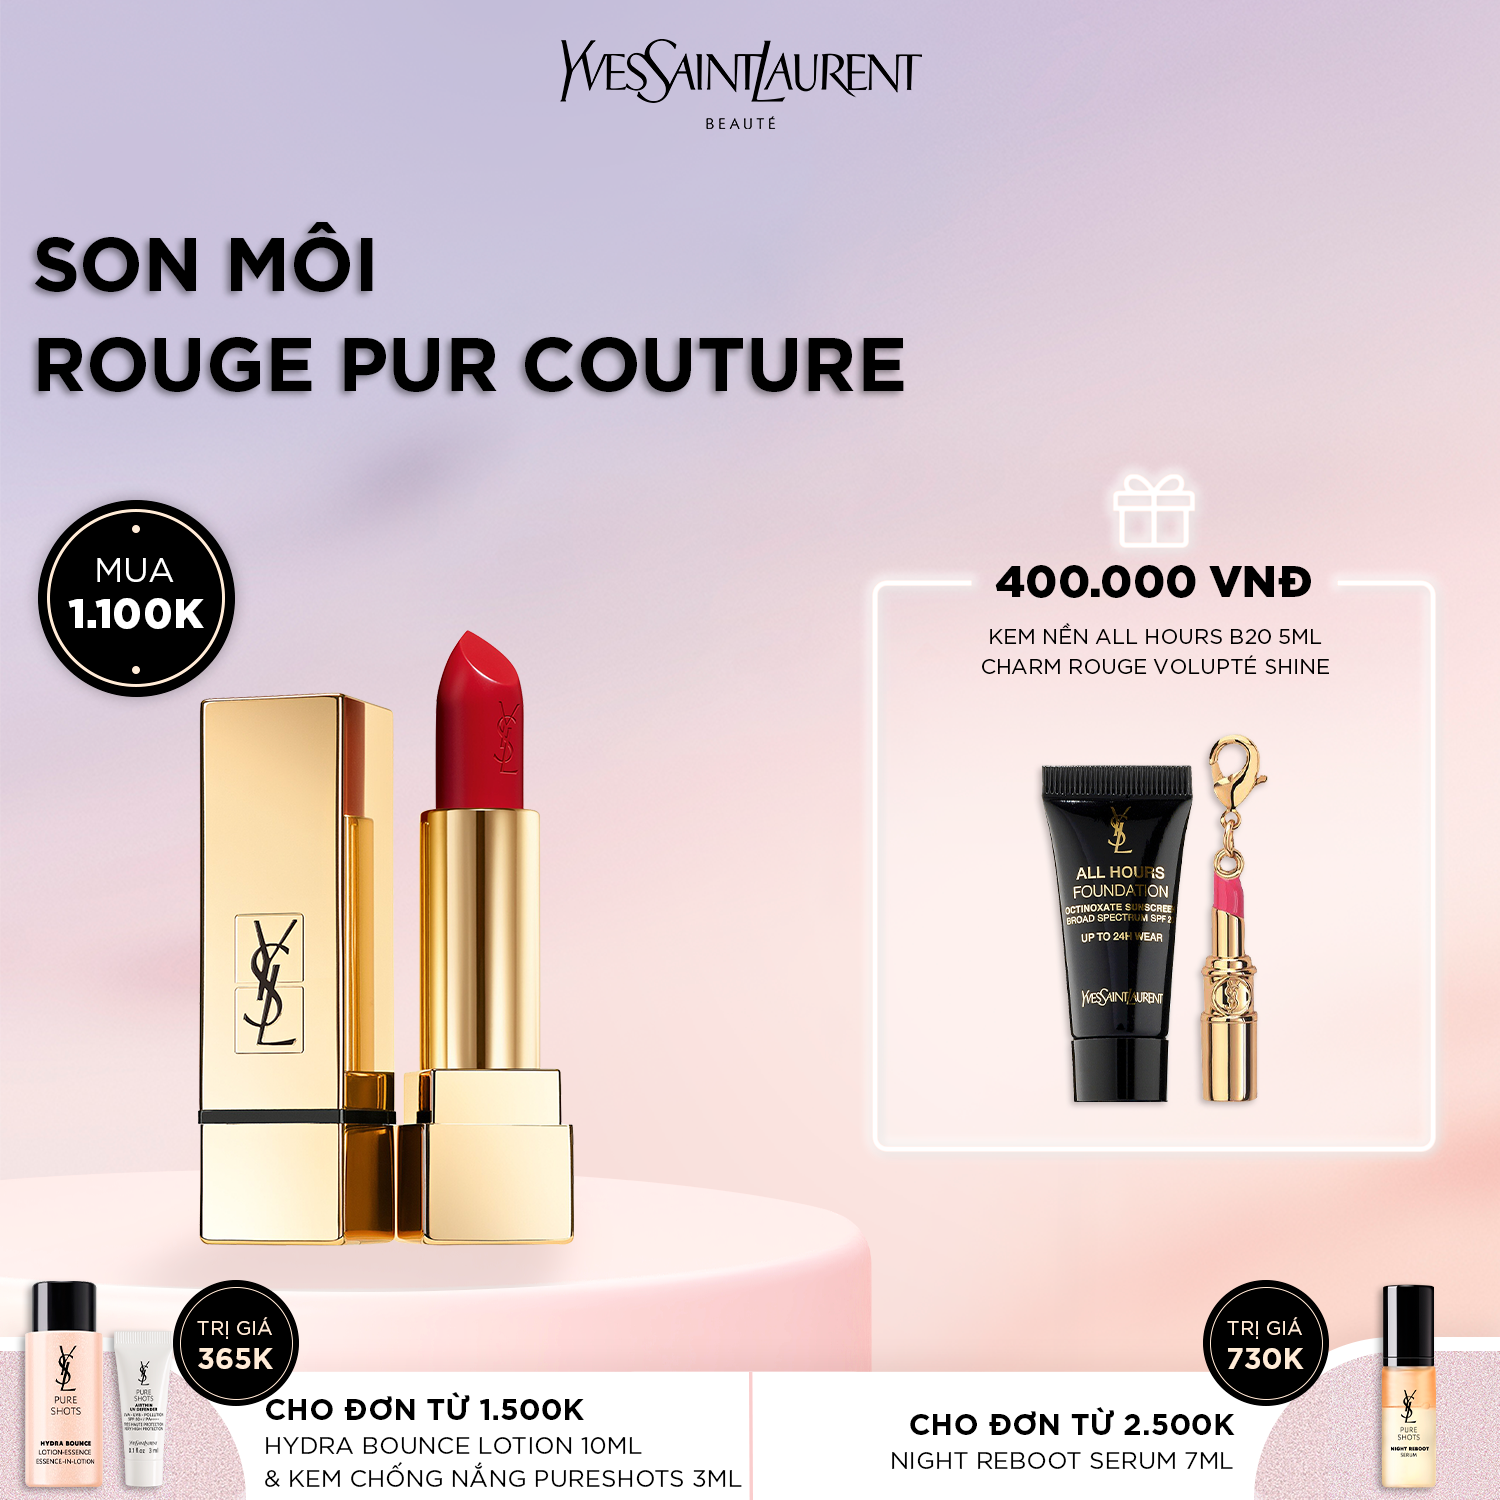 [SV] Son môi Rouge Pur Couture